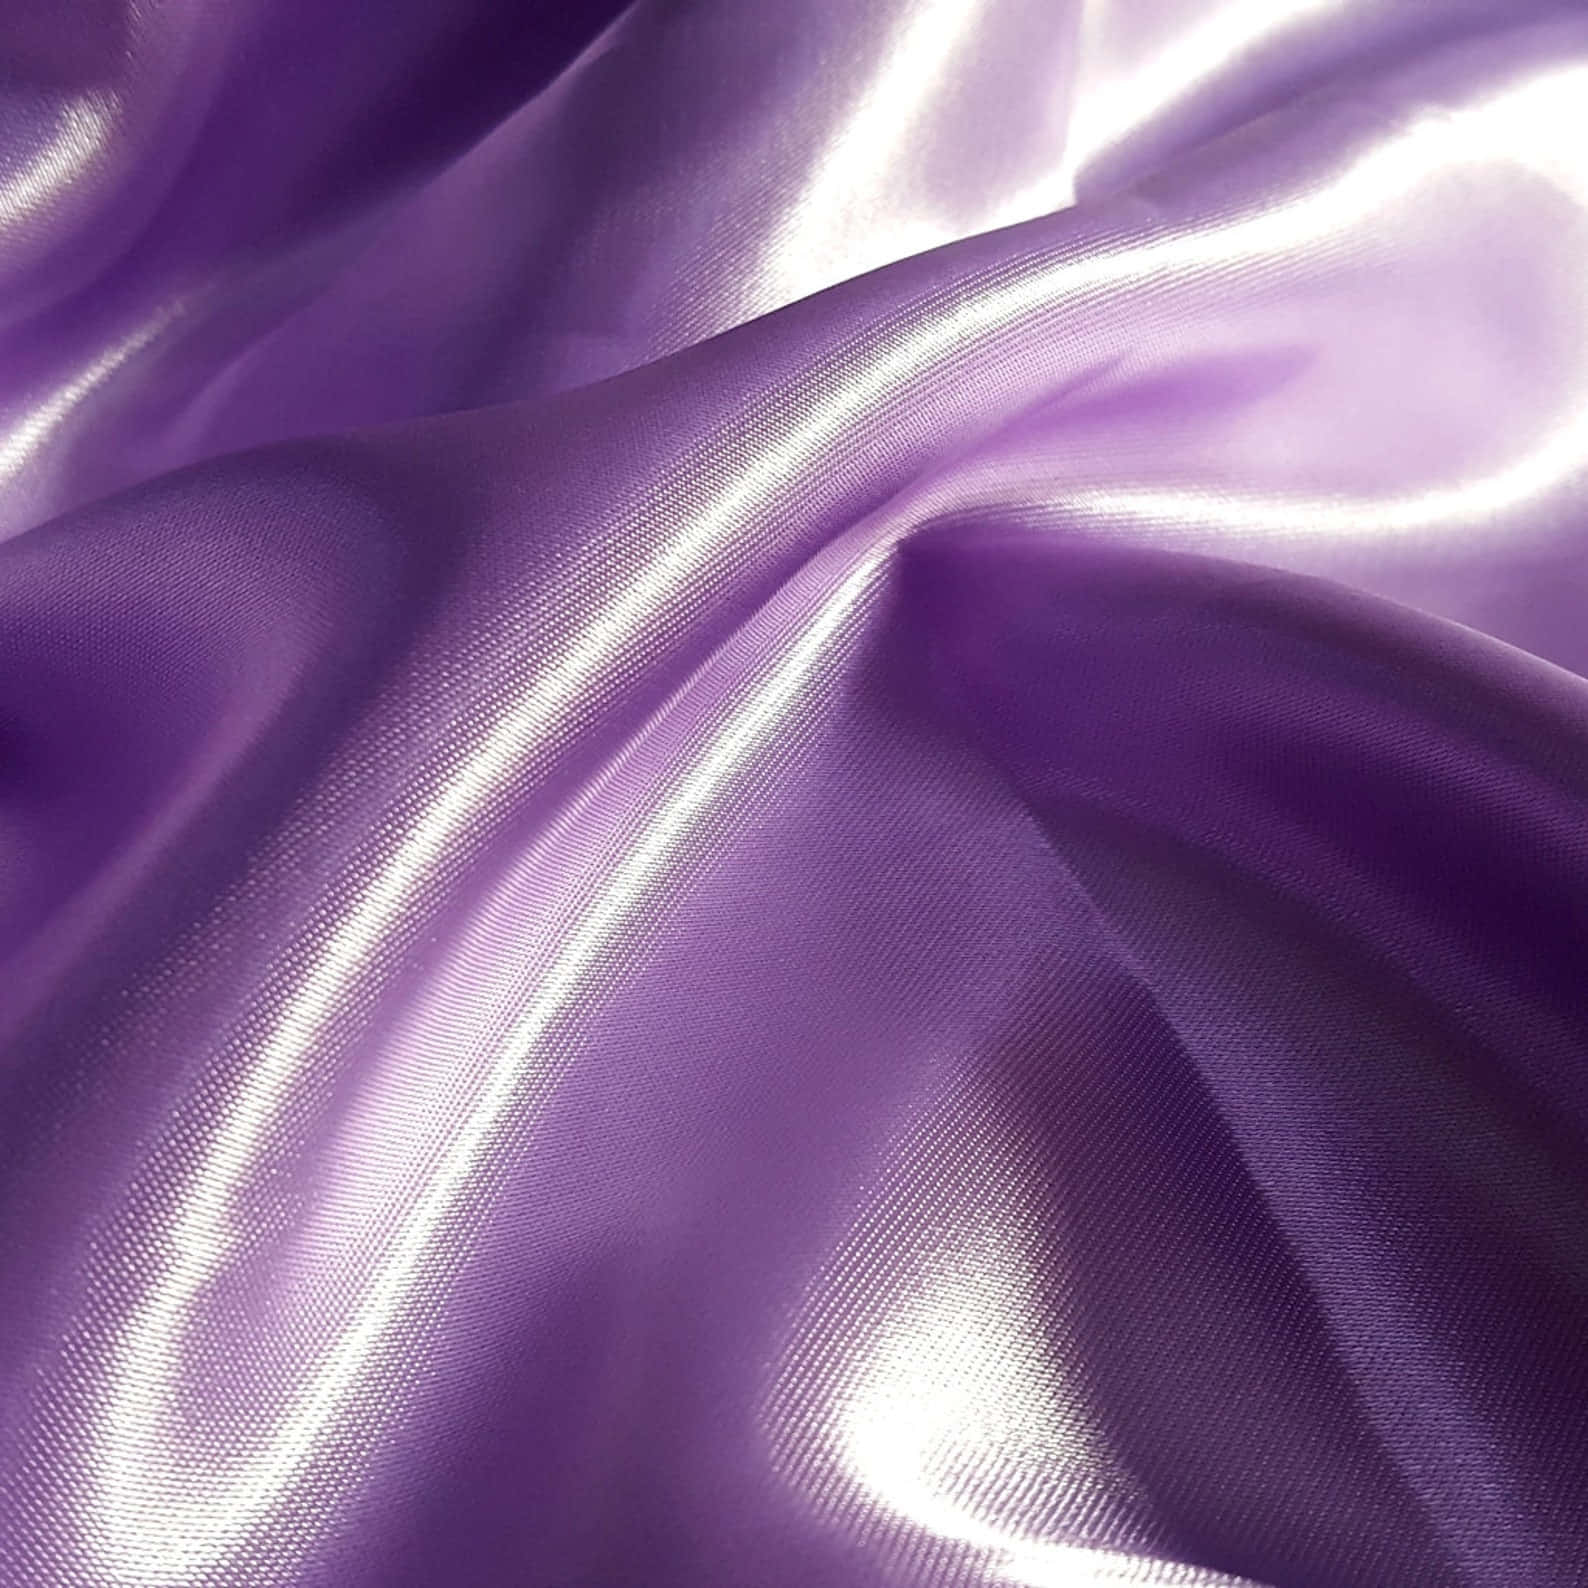 A rich and luxurious purple satin fabric Wallpaper